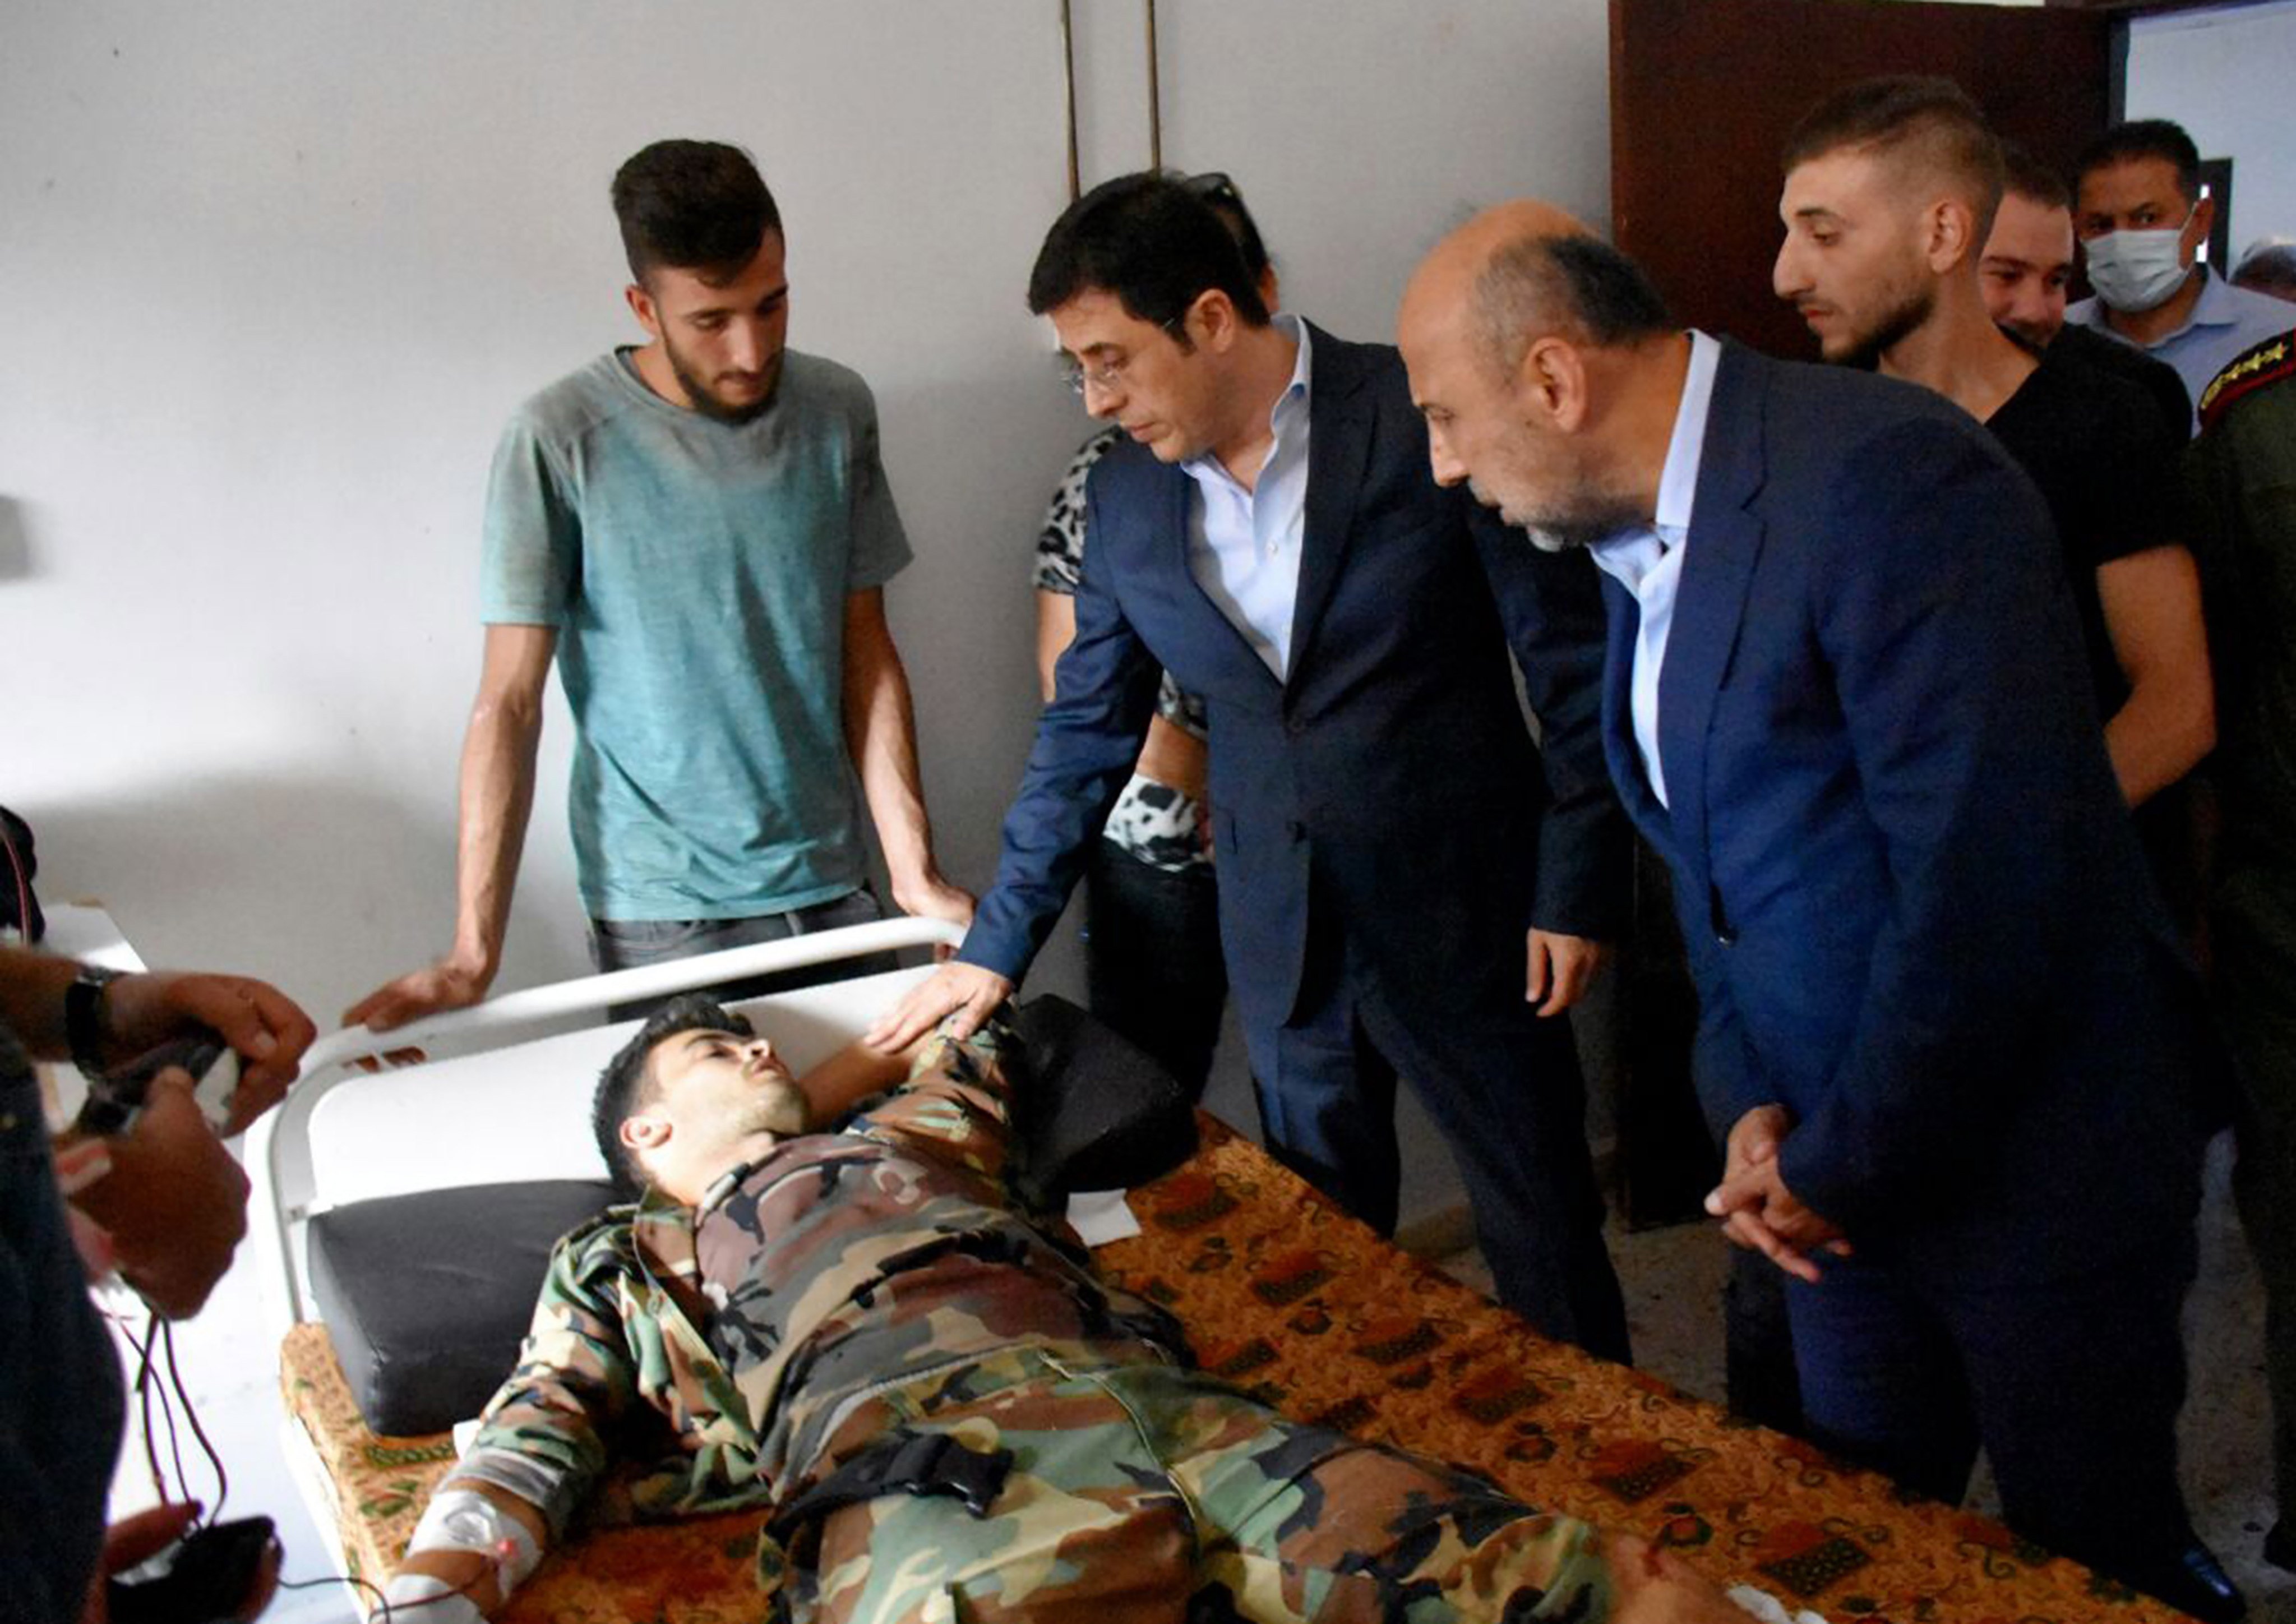 Syrian Health Minister Hassan al-Ghabash (centre) visits a wounded victim of the drone attack. Photo: SANA via EPA-EFE